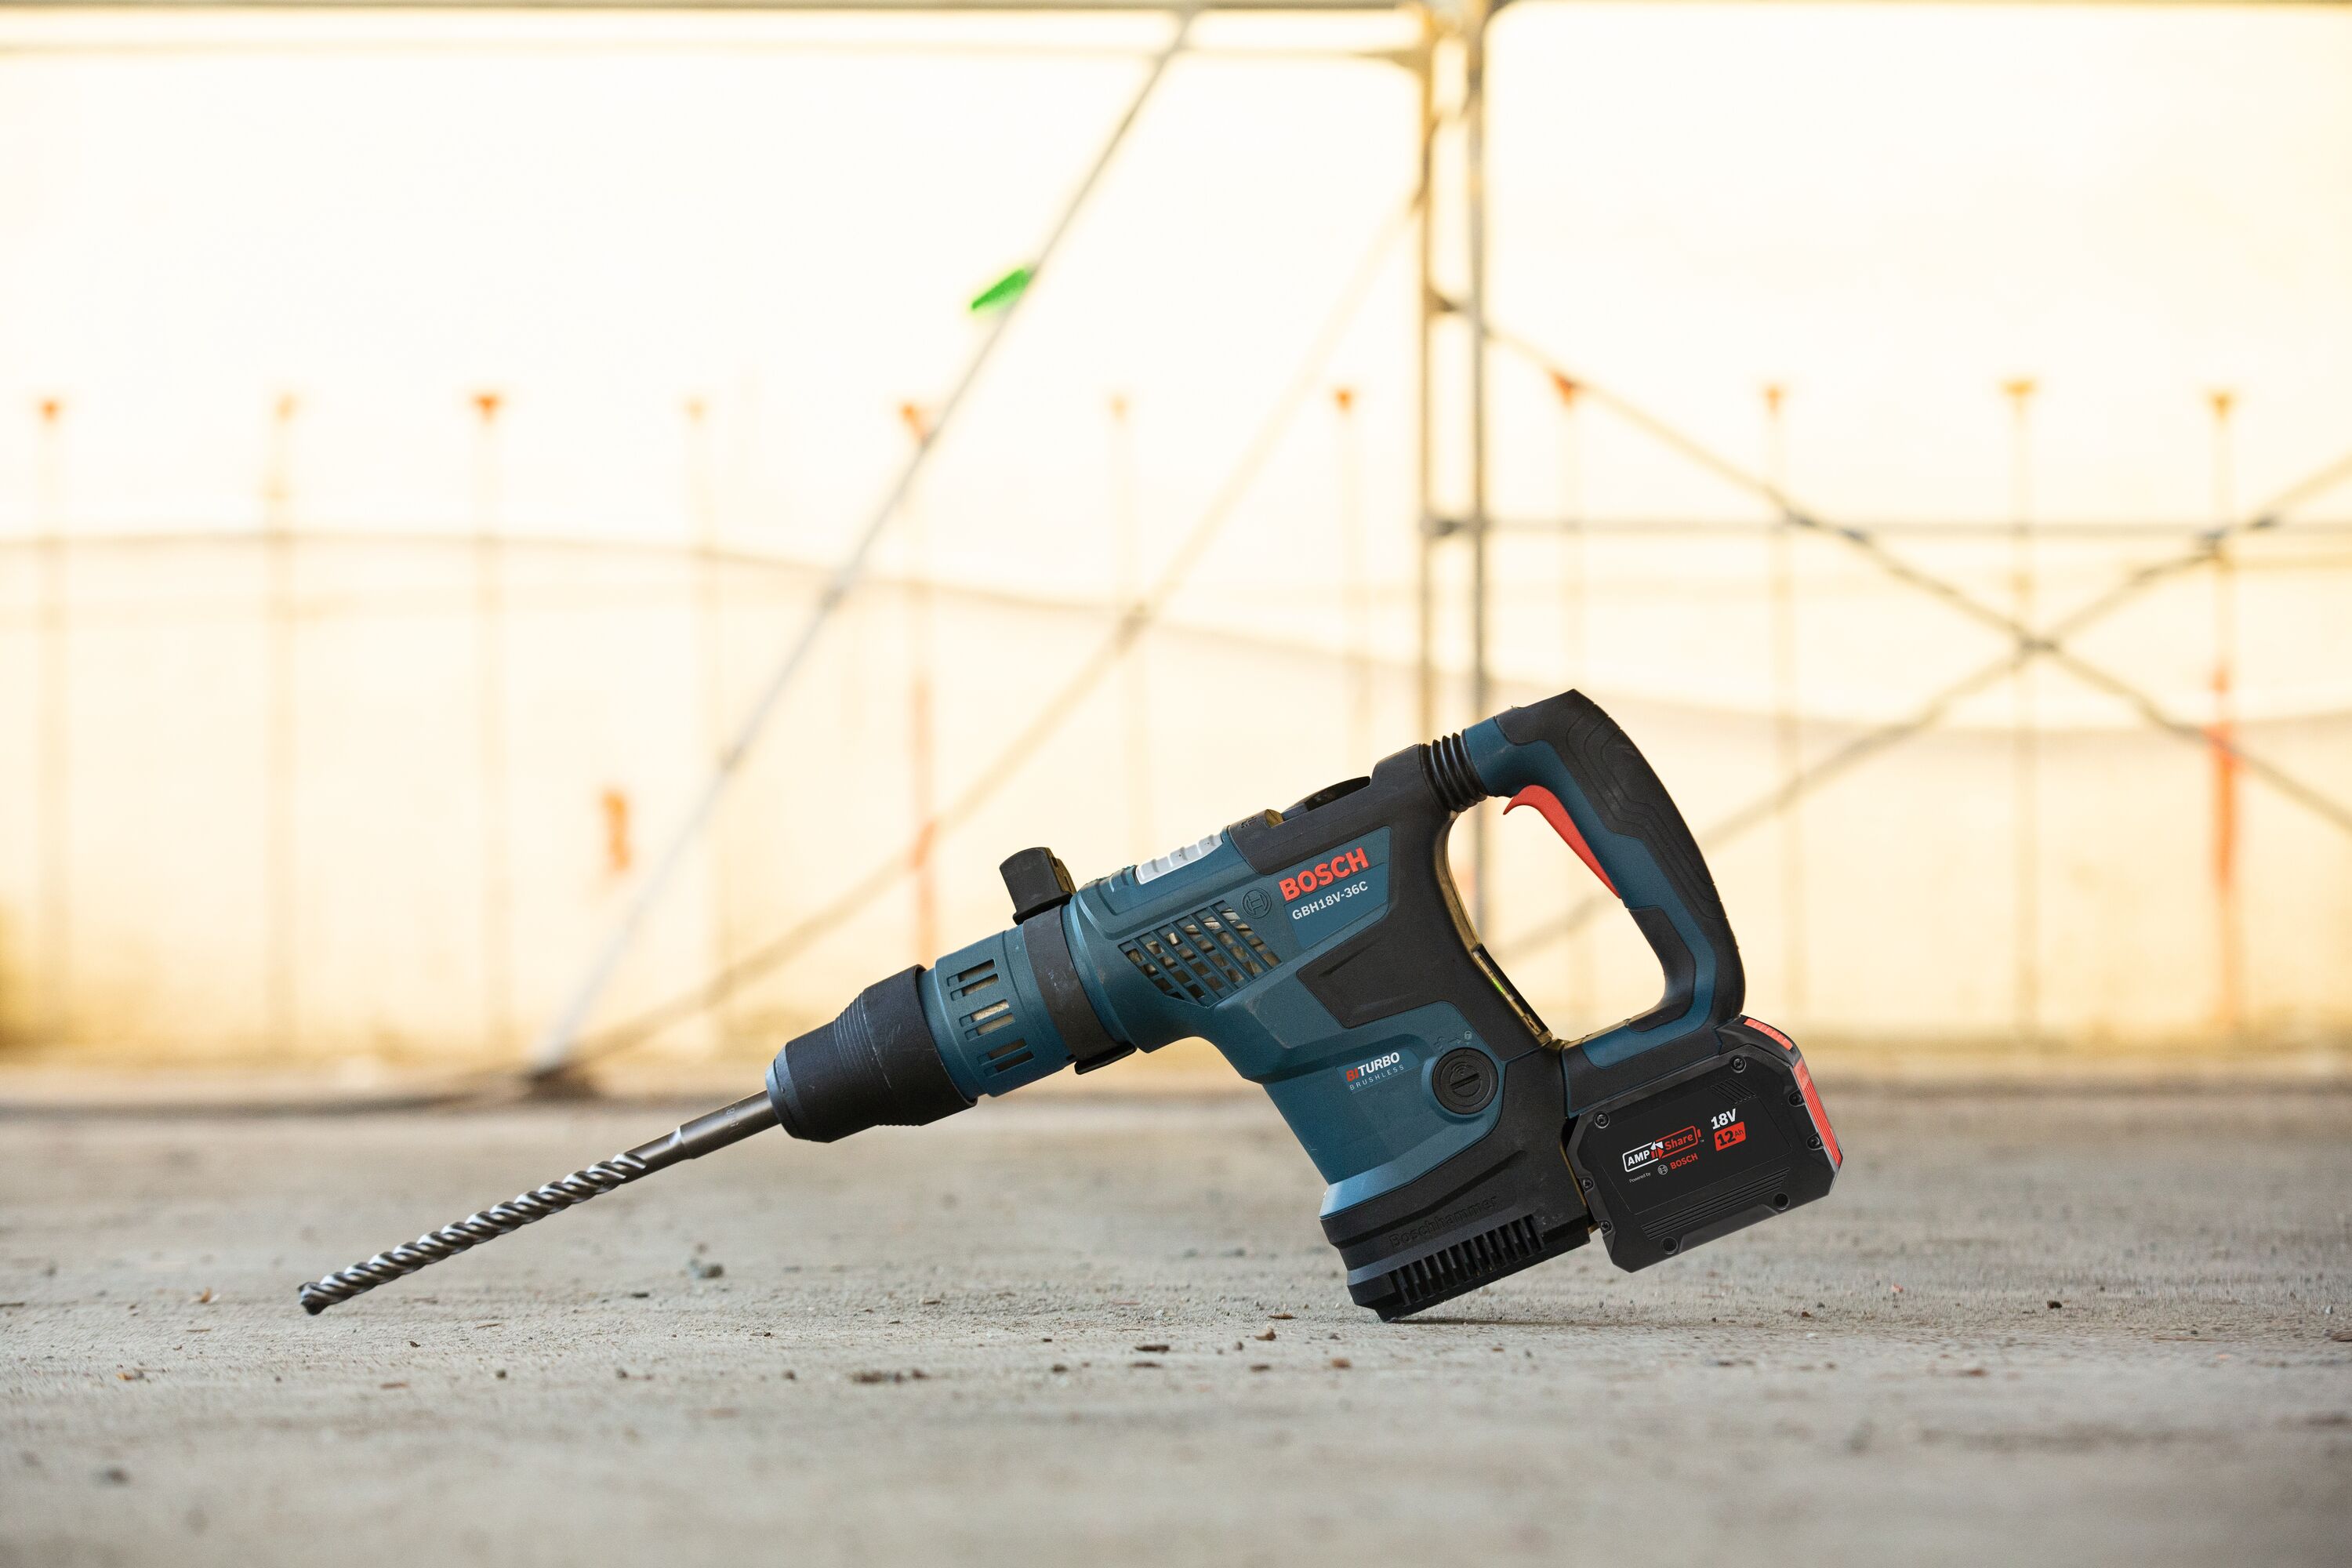 PROFACTOR Hammer in the 8-Amp Speed Variable department 1-9/16-in Rotary Bosch Drill Hammer Cordless 18-volt (Bare Rotary Drills Tool) at Sds-max